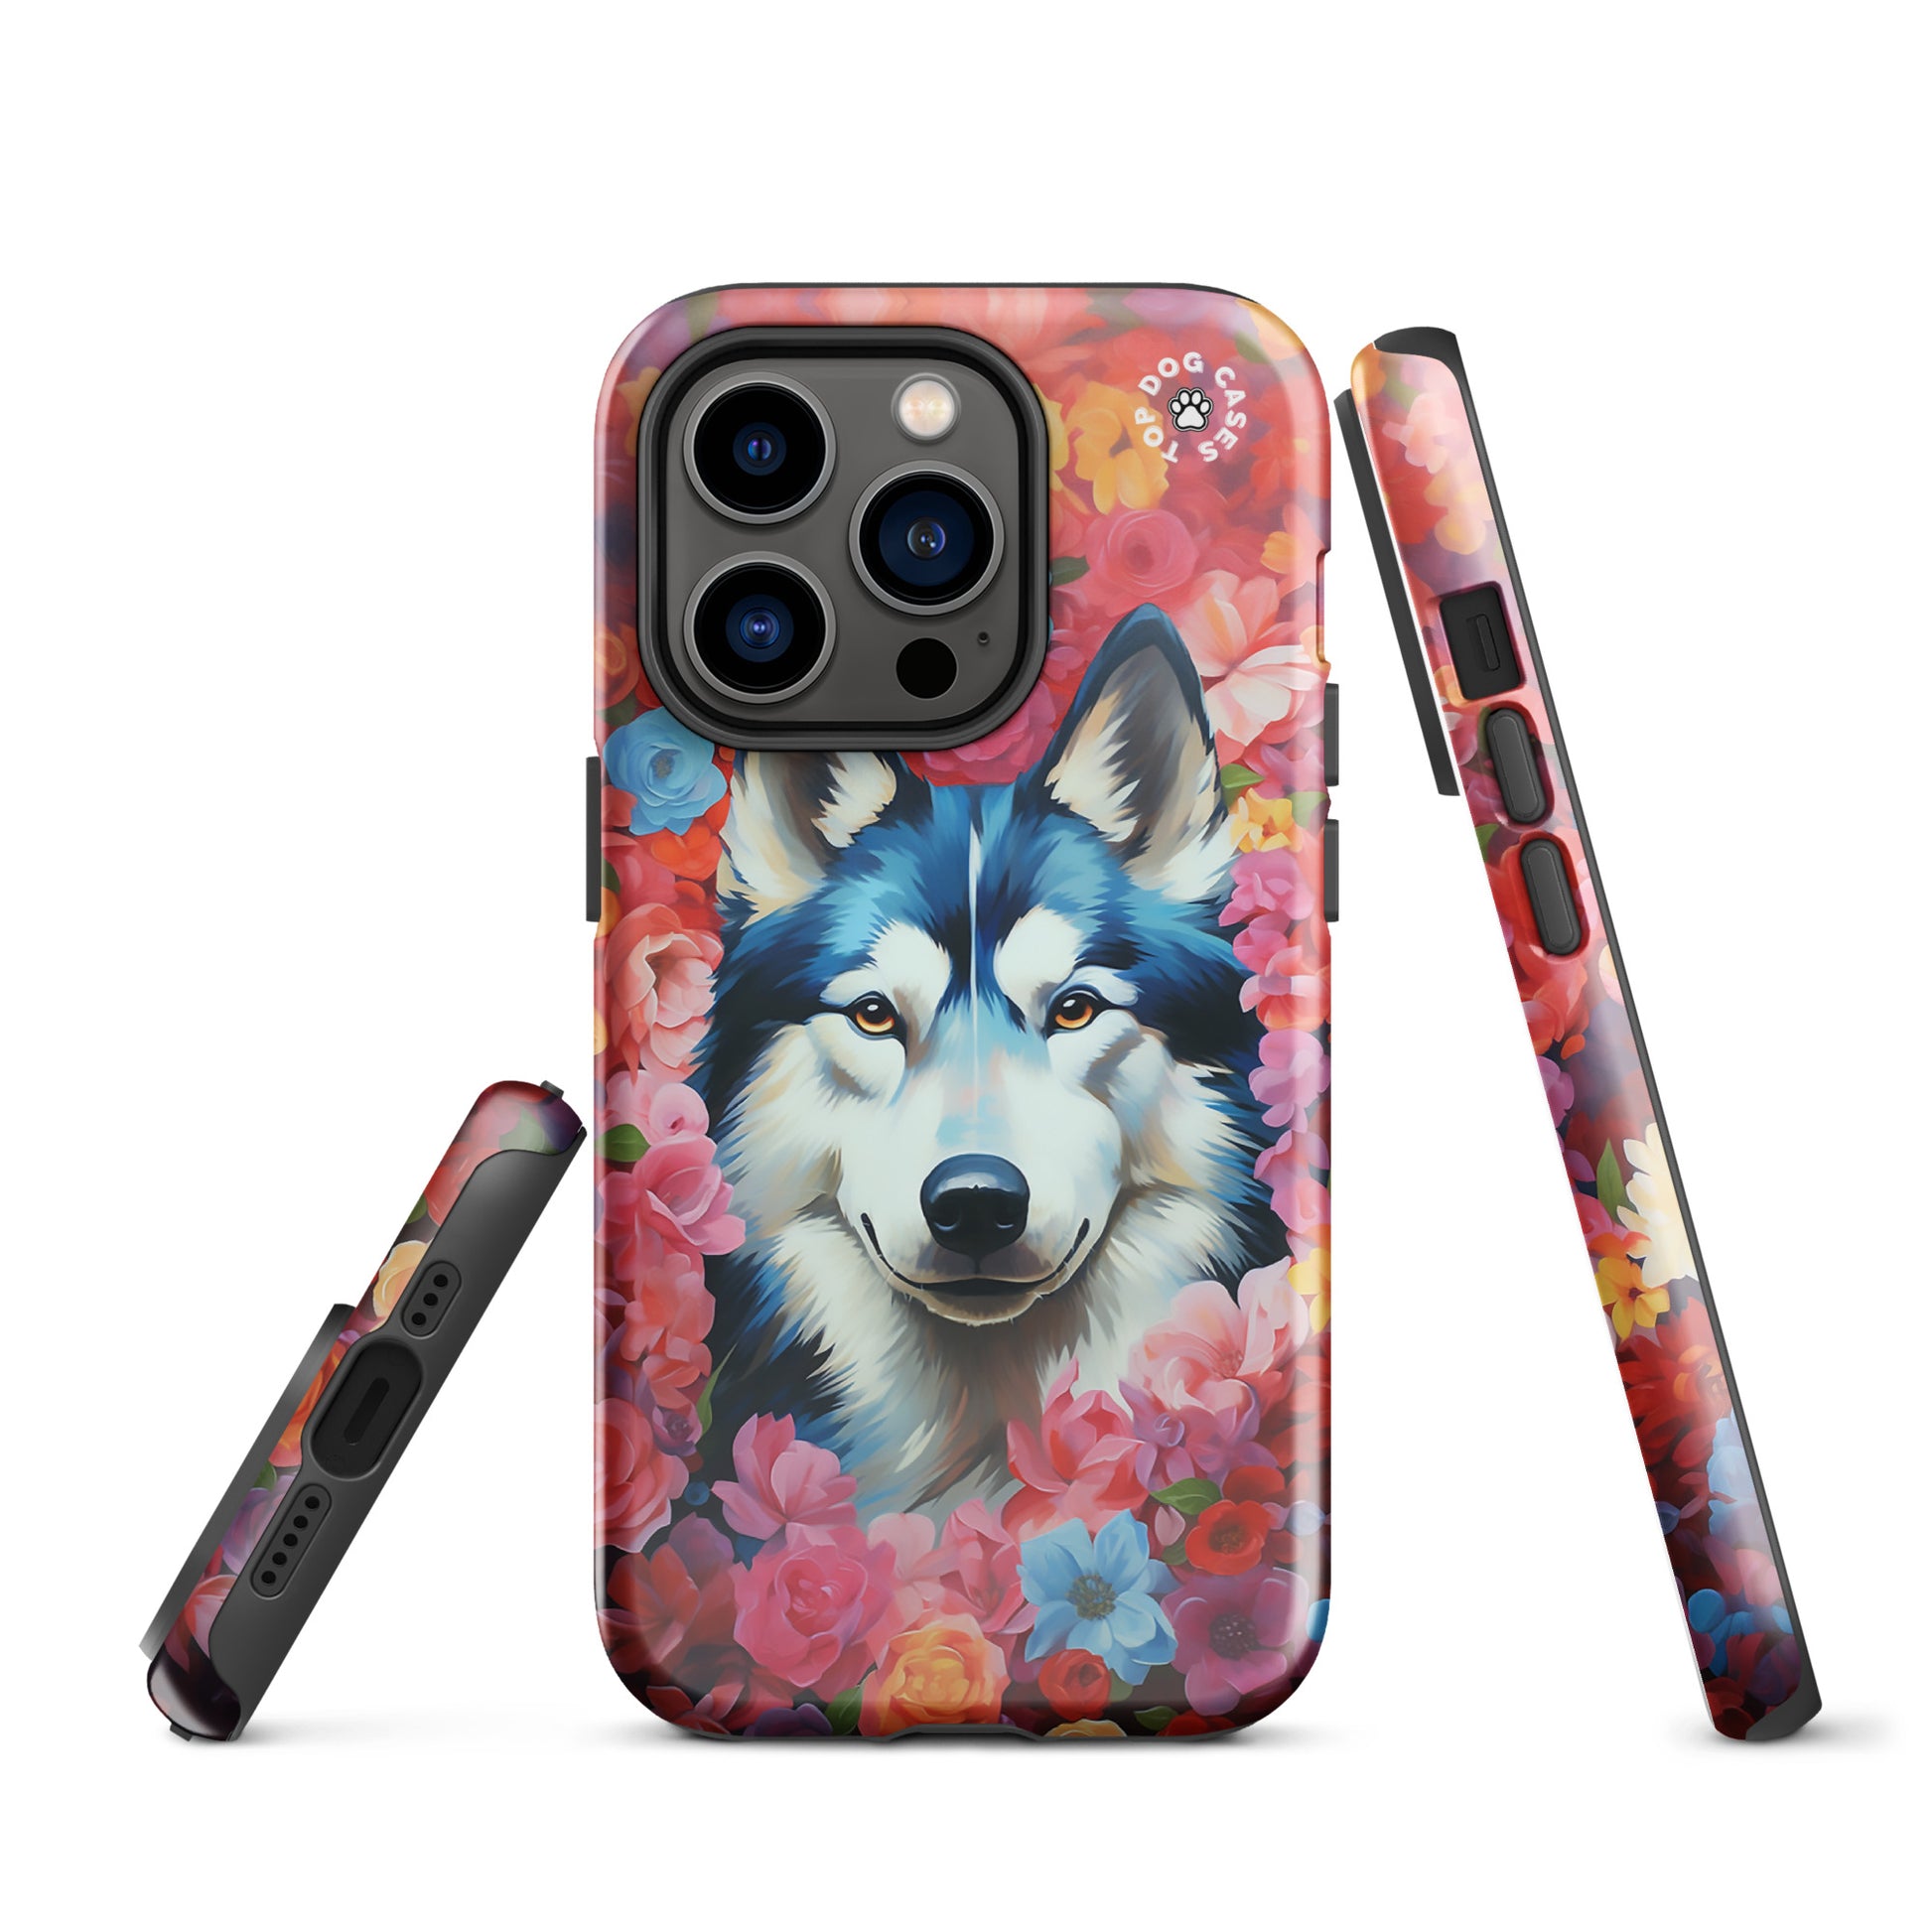 iPhone 14 Case with Siberian Husky - Top Dog Cases - #CuteDog, #CuteDogs, #CutePhoneCases, #DogPhoneCase, #dogs, #DogsAndFlowers, #Flowers, #Husky, #iPhone, #iPhone14, #iPhone14case, #iPhone14DogCase, #iPhone14Plus, #iPhone14Pluscase, #iPhone14Pro, #iPhone14ProMax, #iPhone14ProMaxCase, #iPhonecase